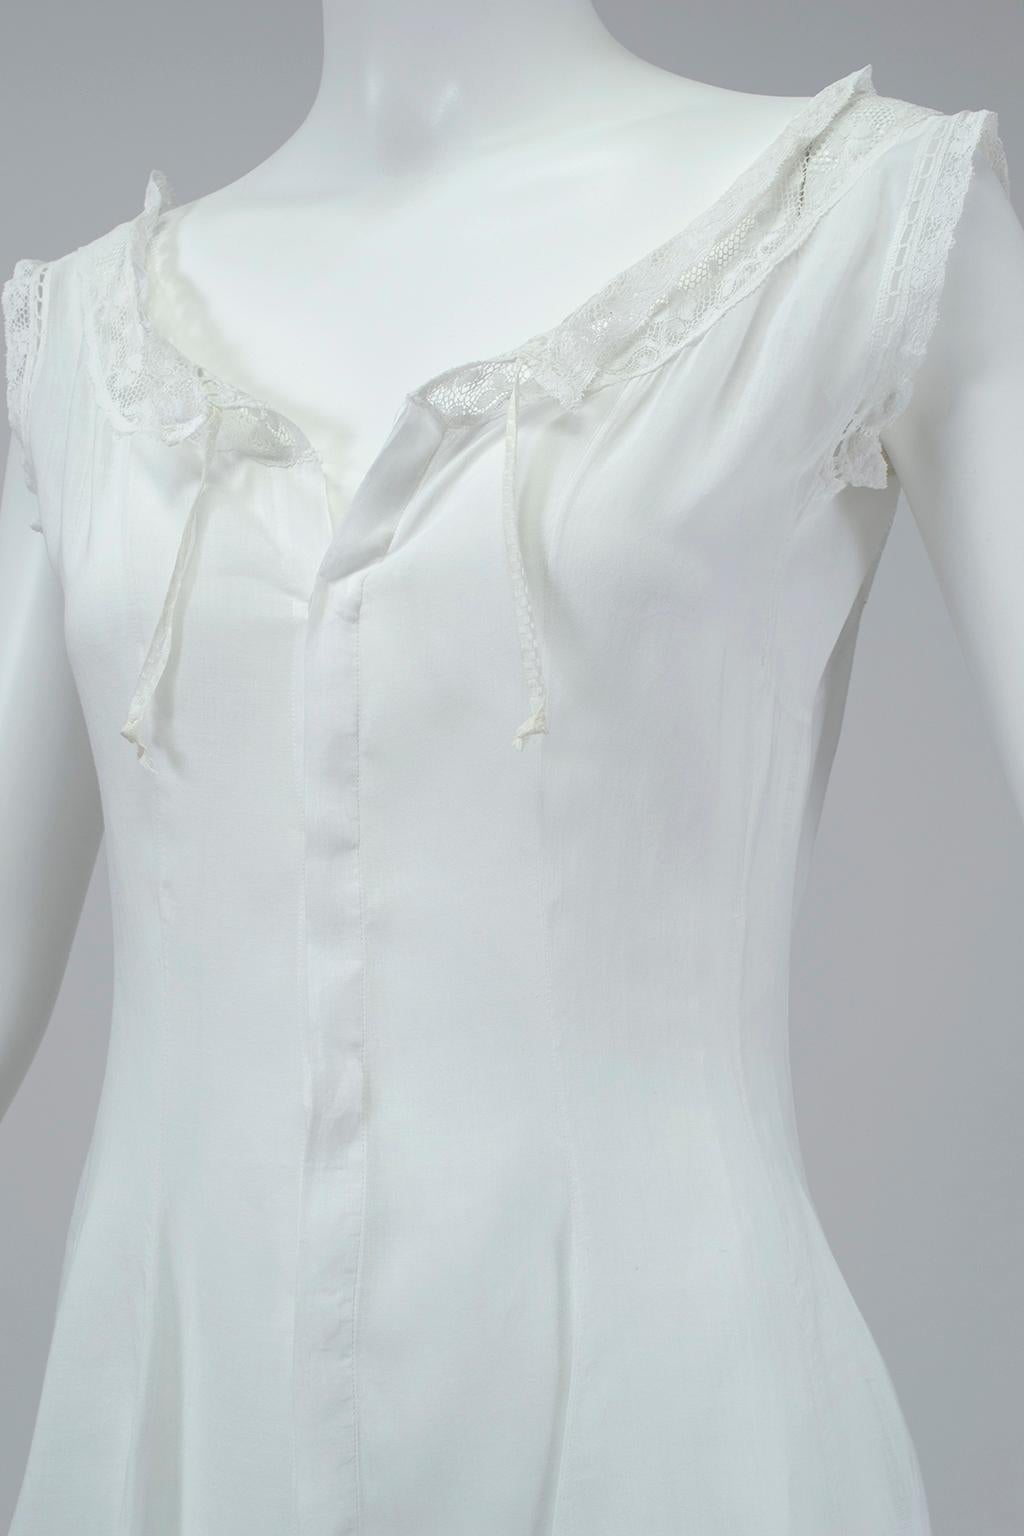 White Edwardian Eyelet and Lace Full Bridal Petticoat Nightgown - XS, 1900s In Good Condition In Tucson, AZ